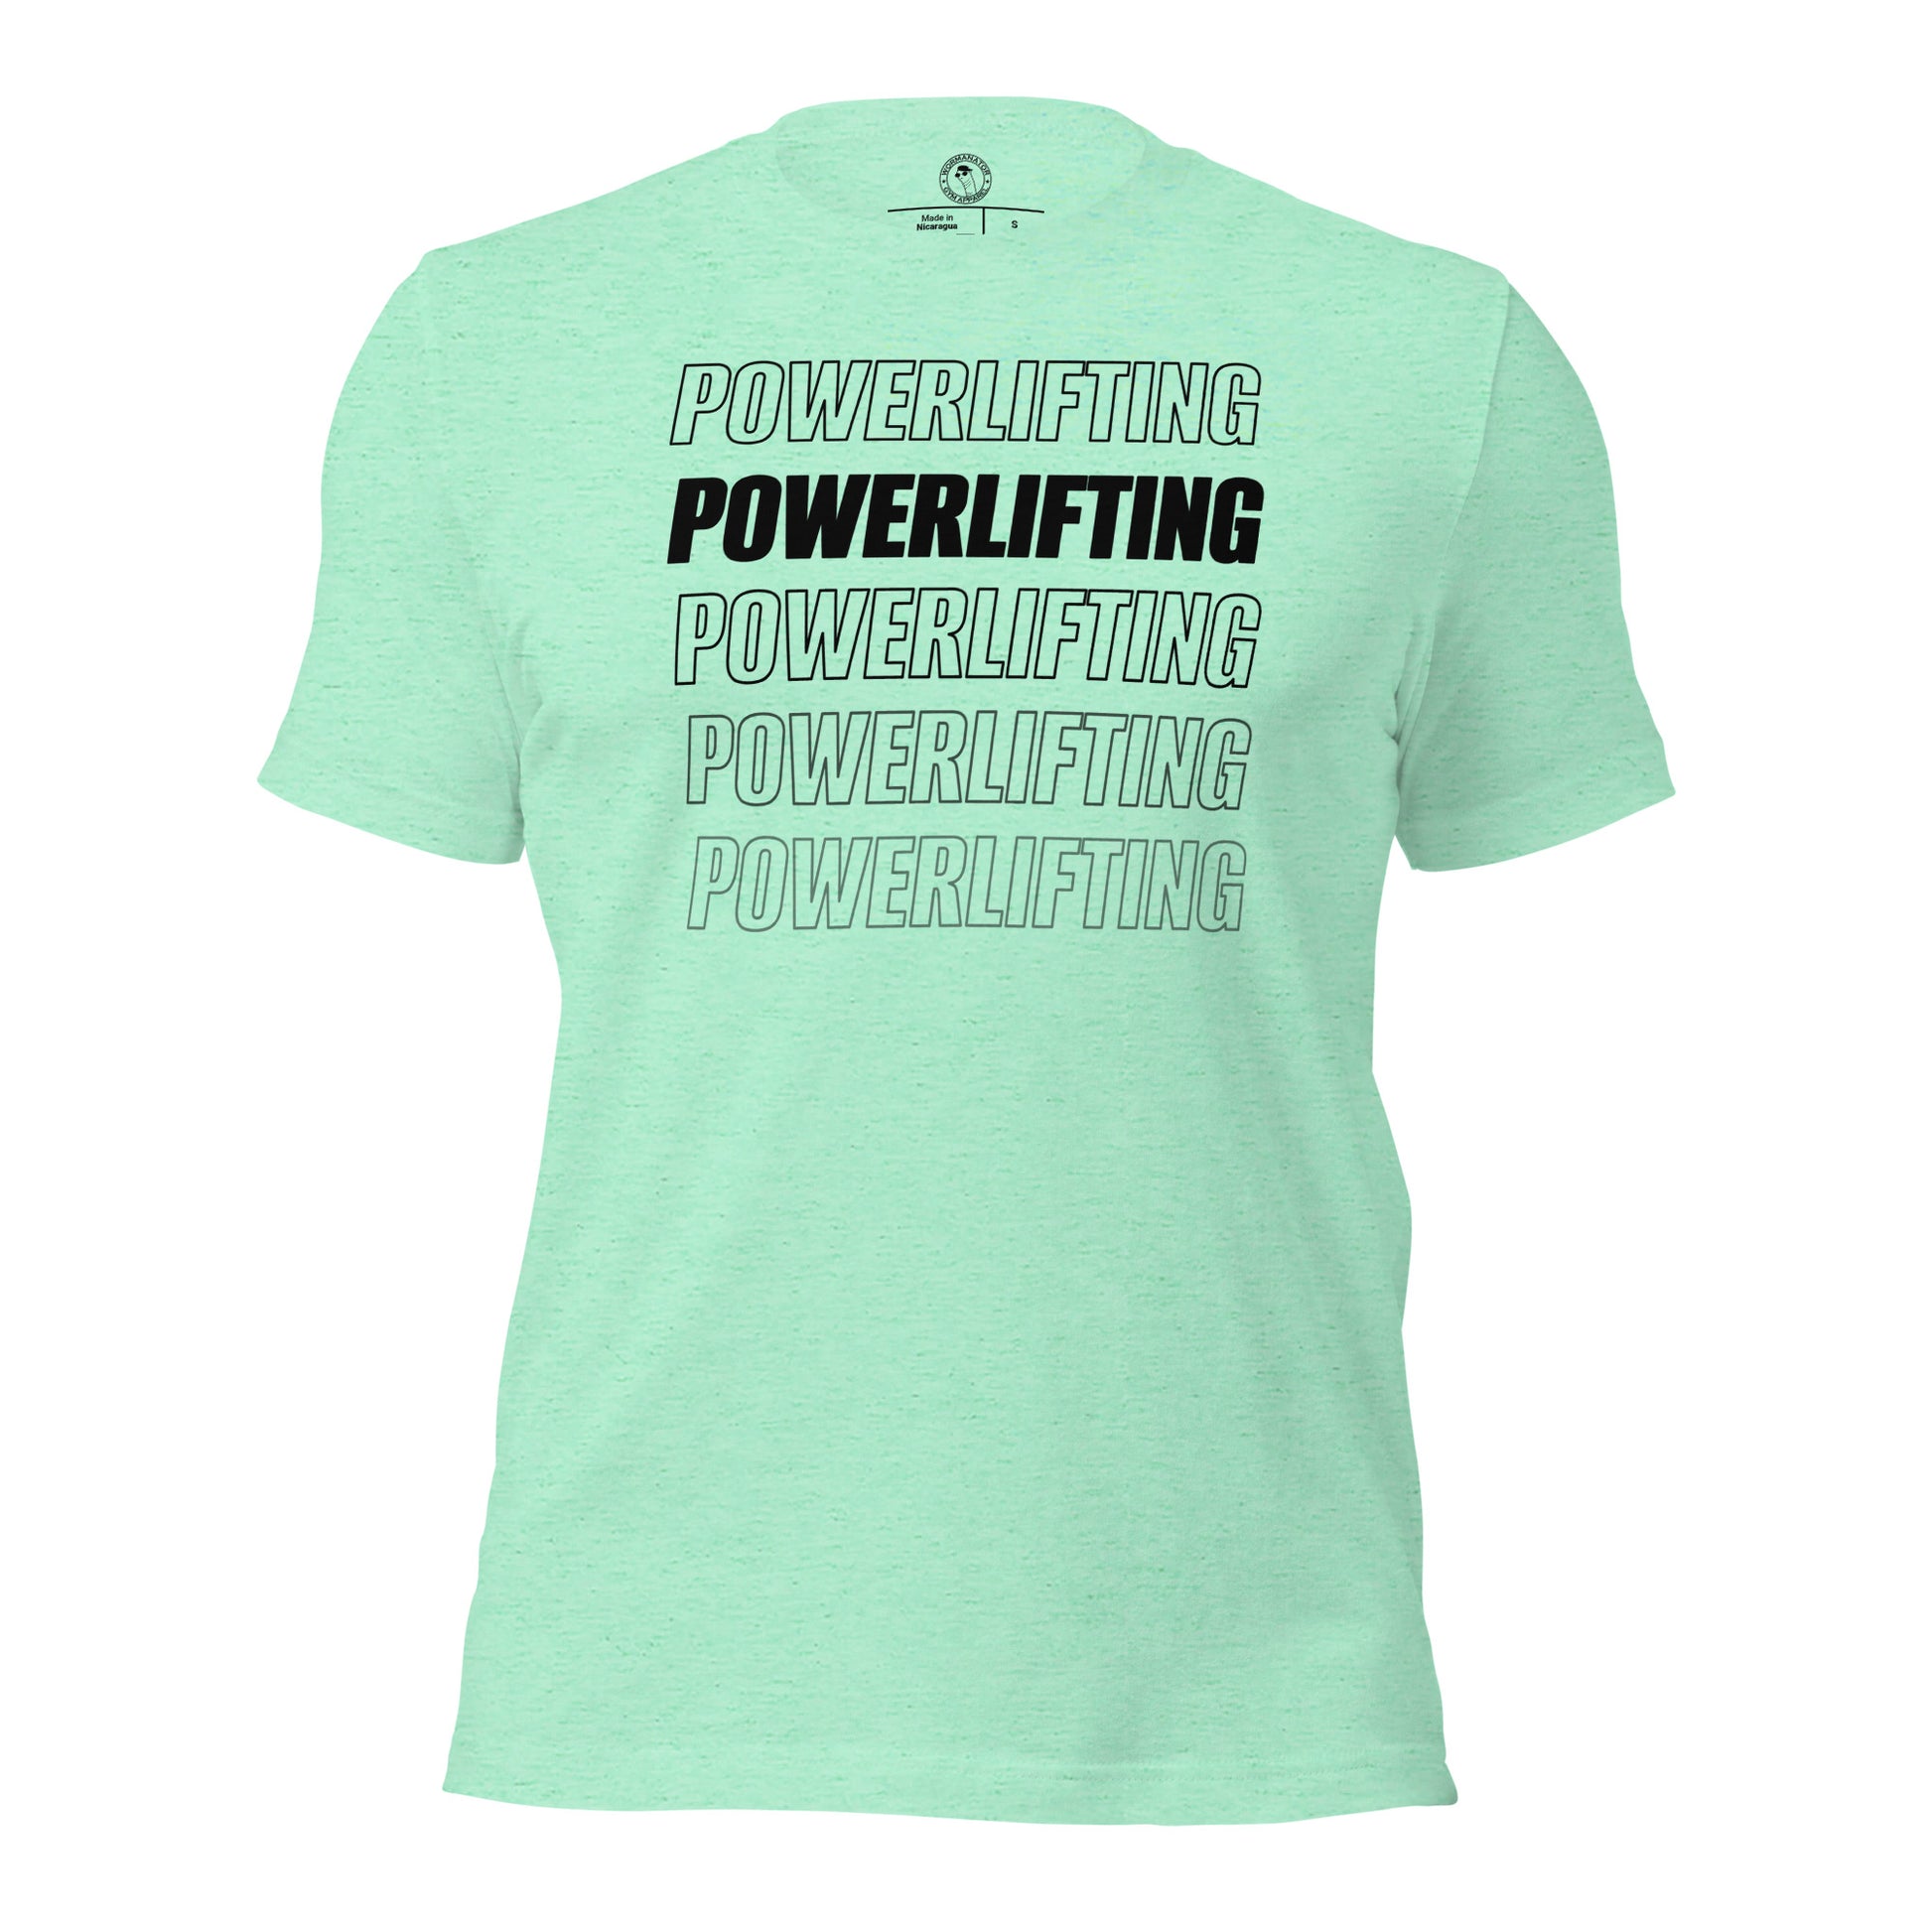 Powerlifting Shirt in Heather Mint